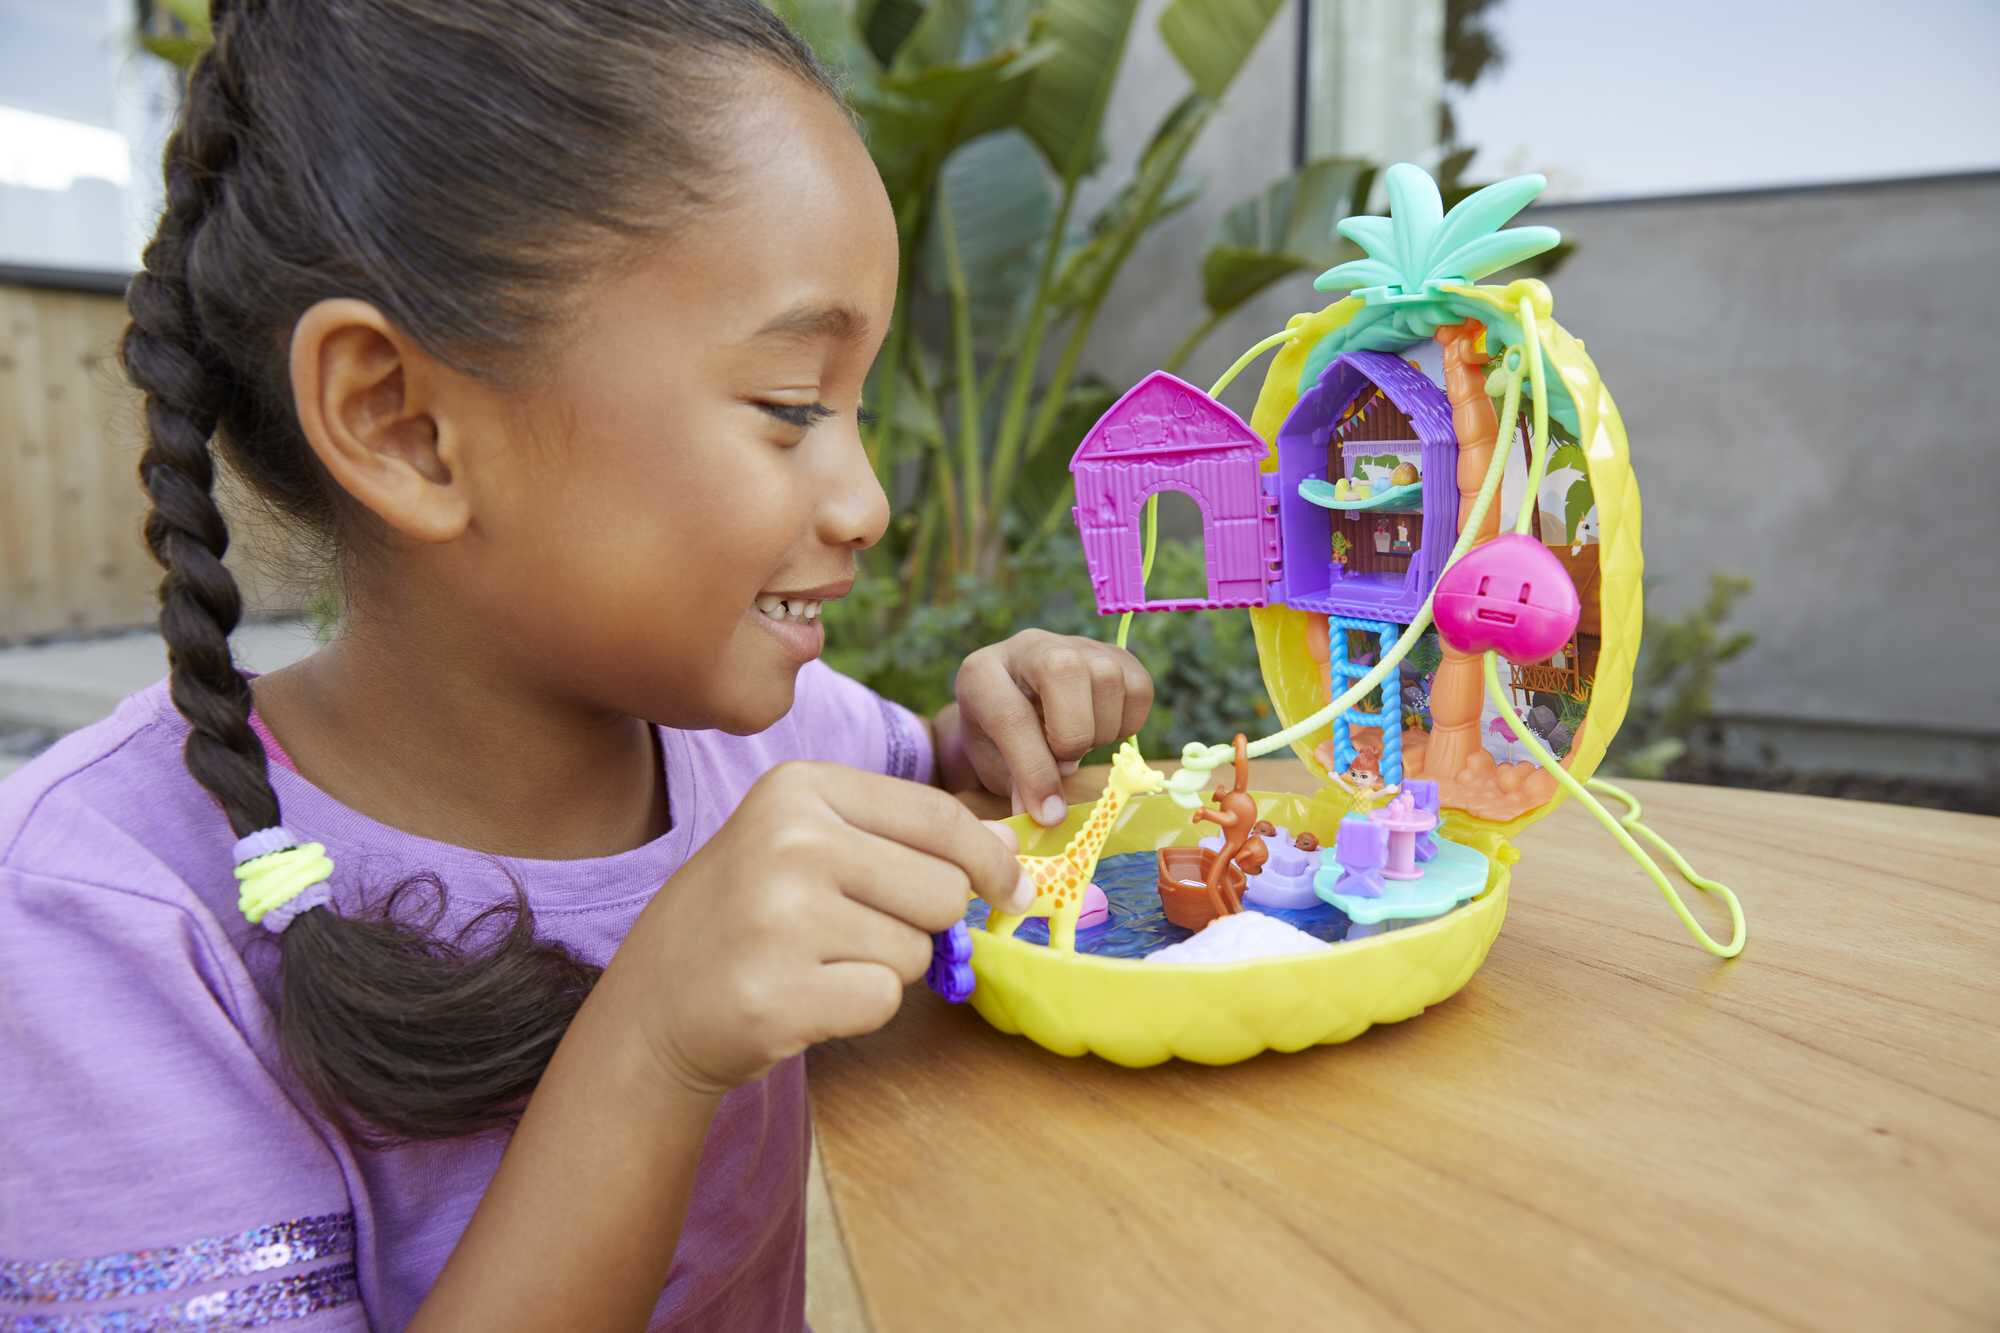 Polly Pocket 2-in-1 Pineapple Purse Playset with Micro Polly and Lila Dolls and Accessories - image 3 of 7